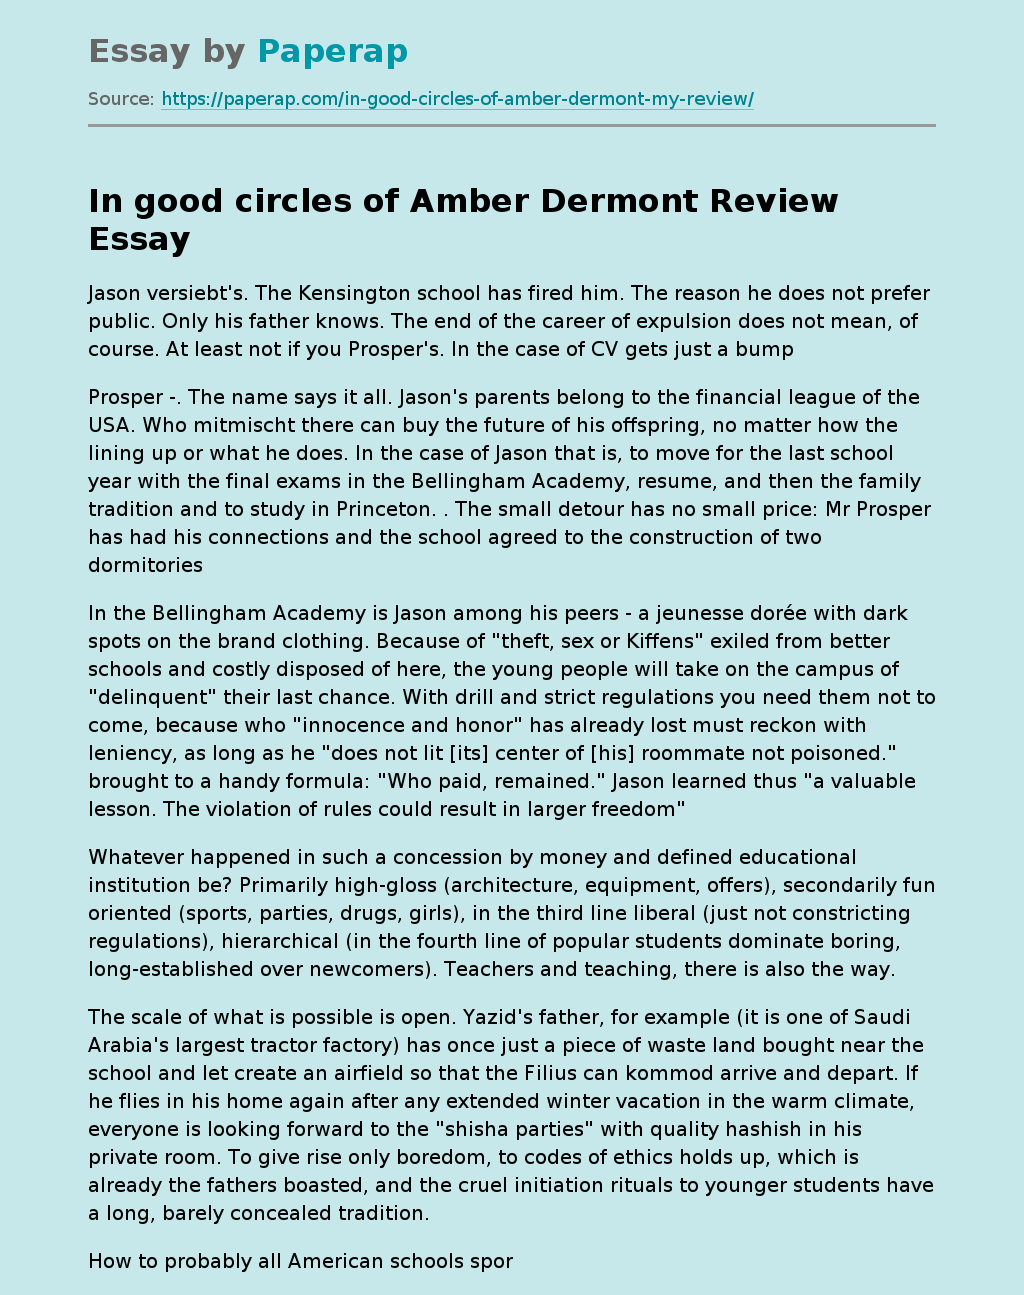 In good circles of Amber Dermont Review